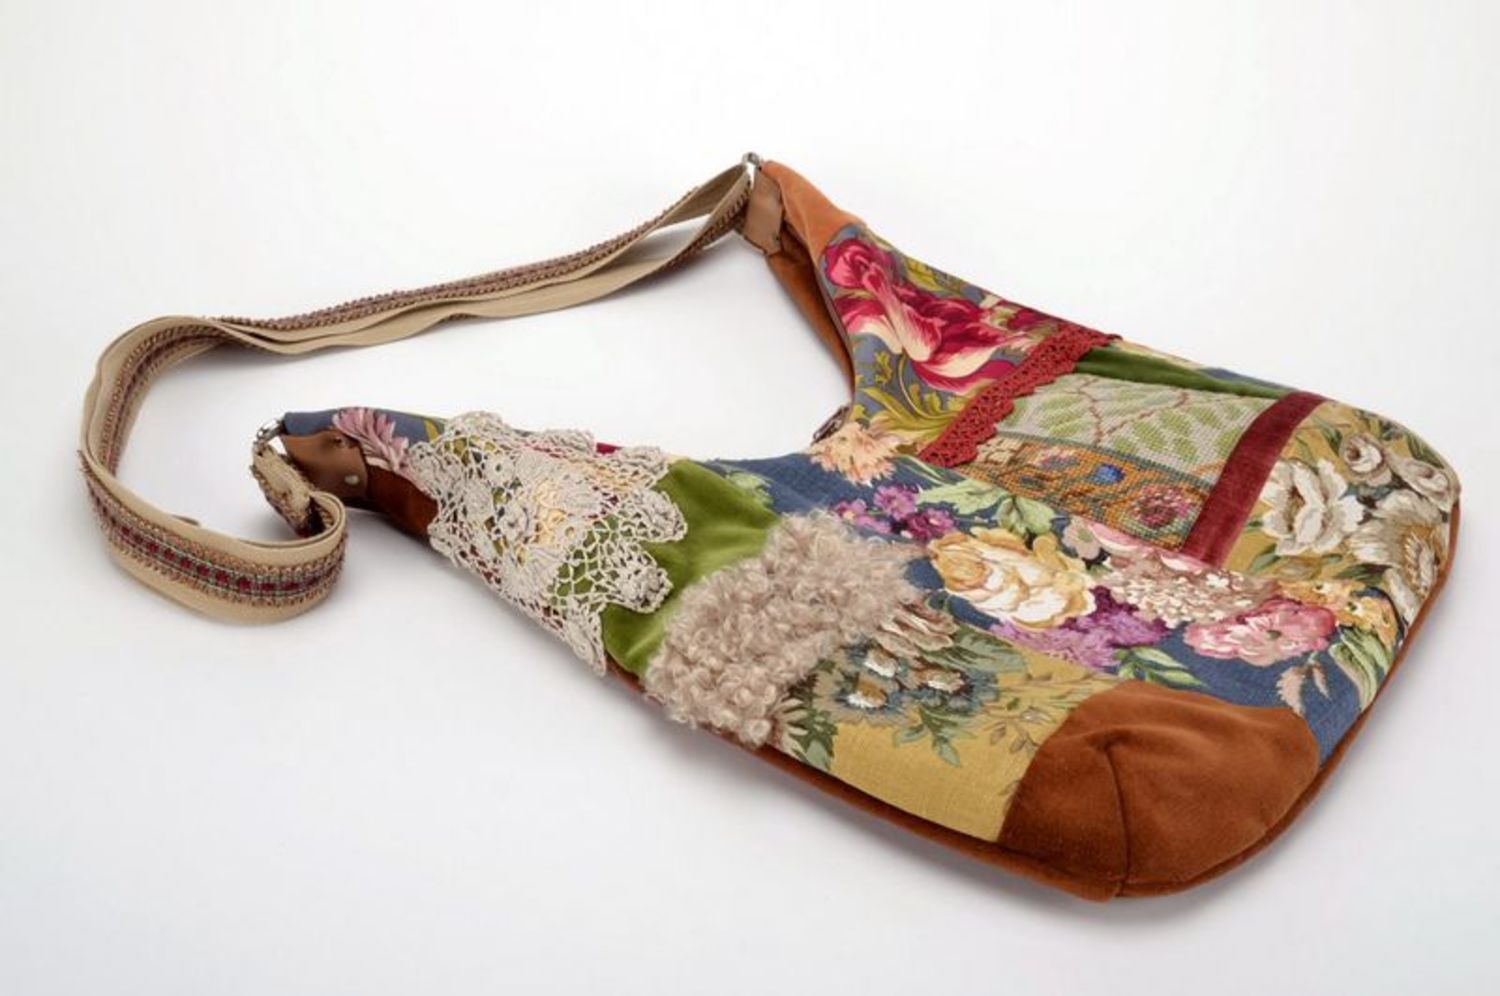 Faric patchwork bag  photo 4